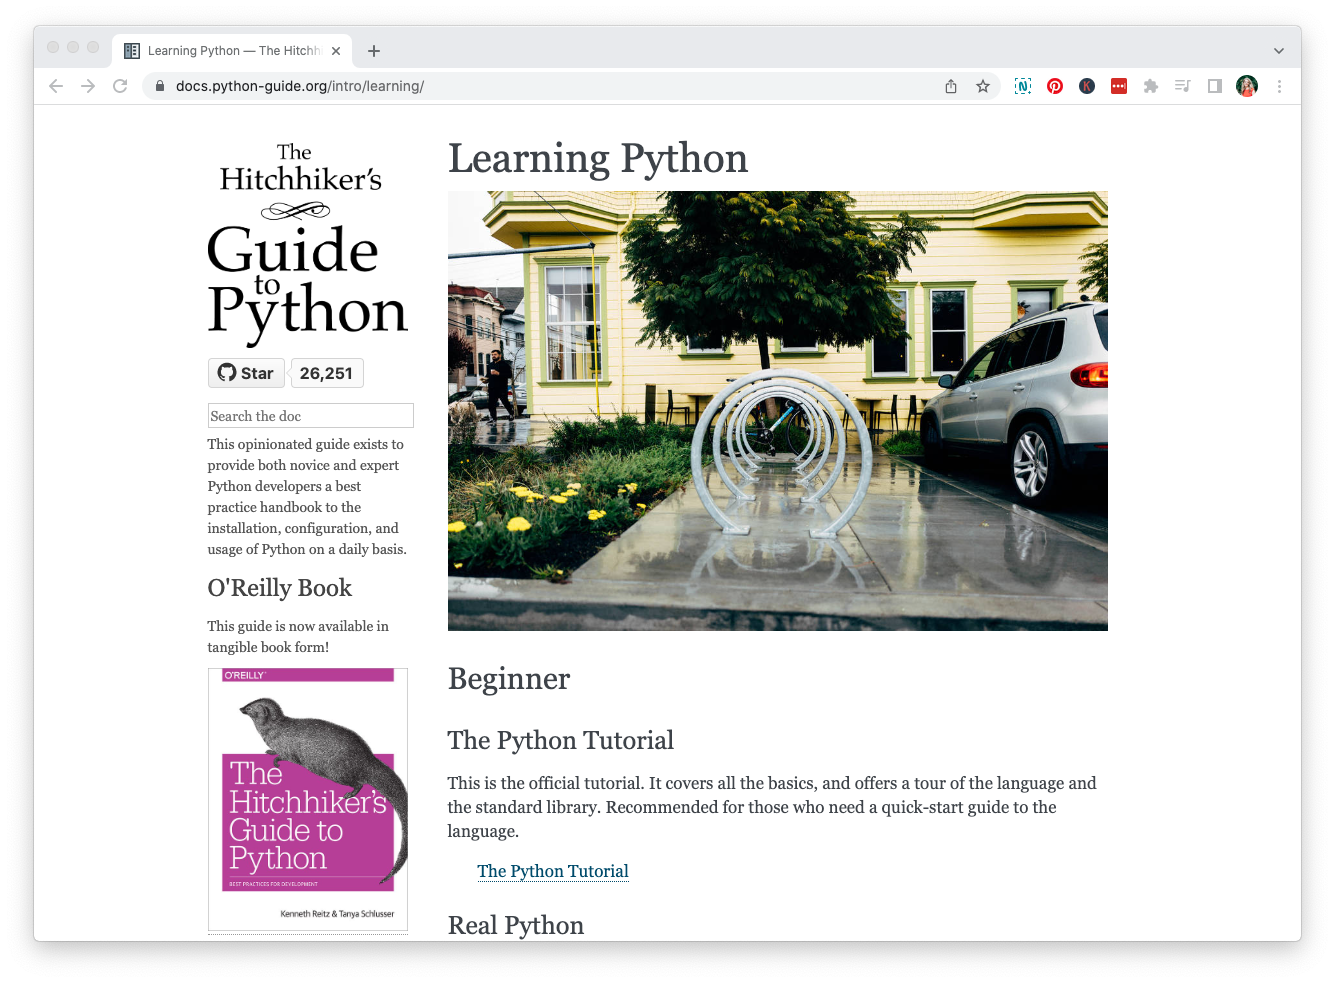 A view of the website A Hitchhiker's Guide to Python